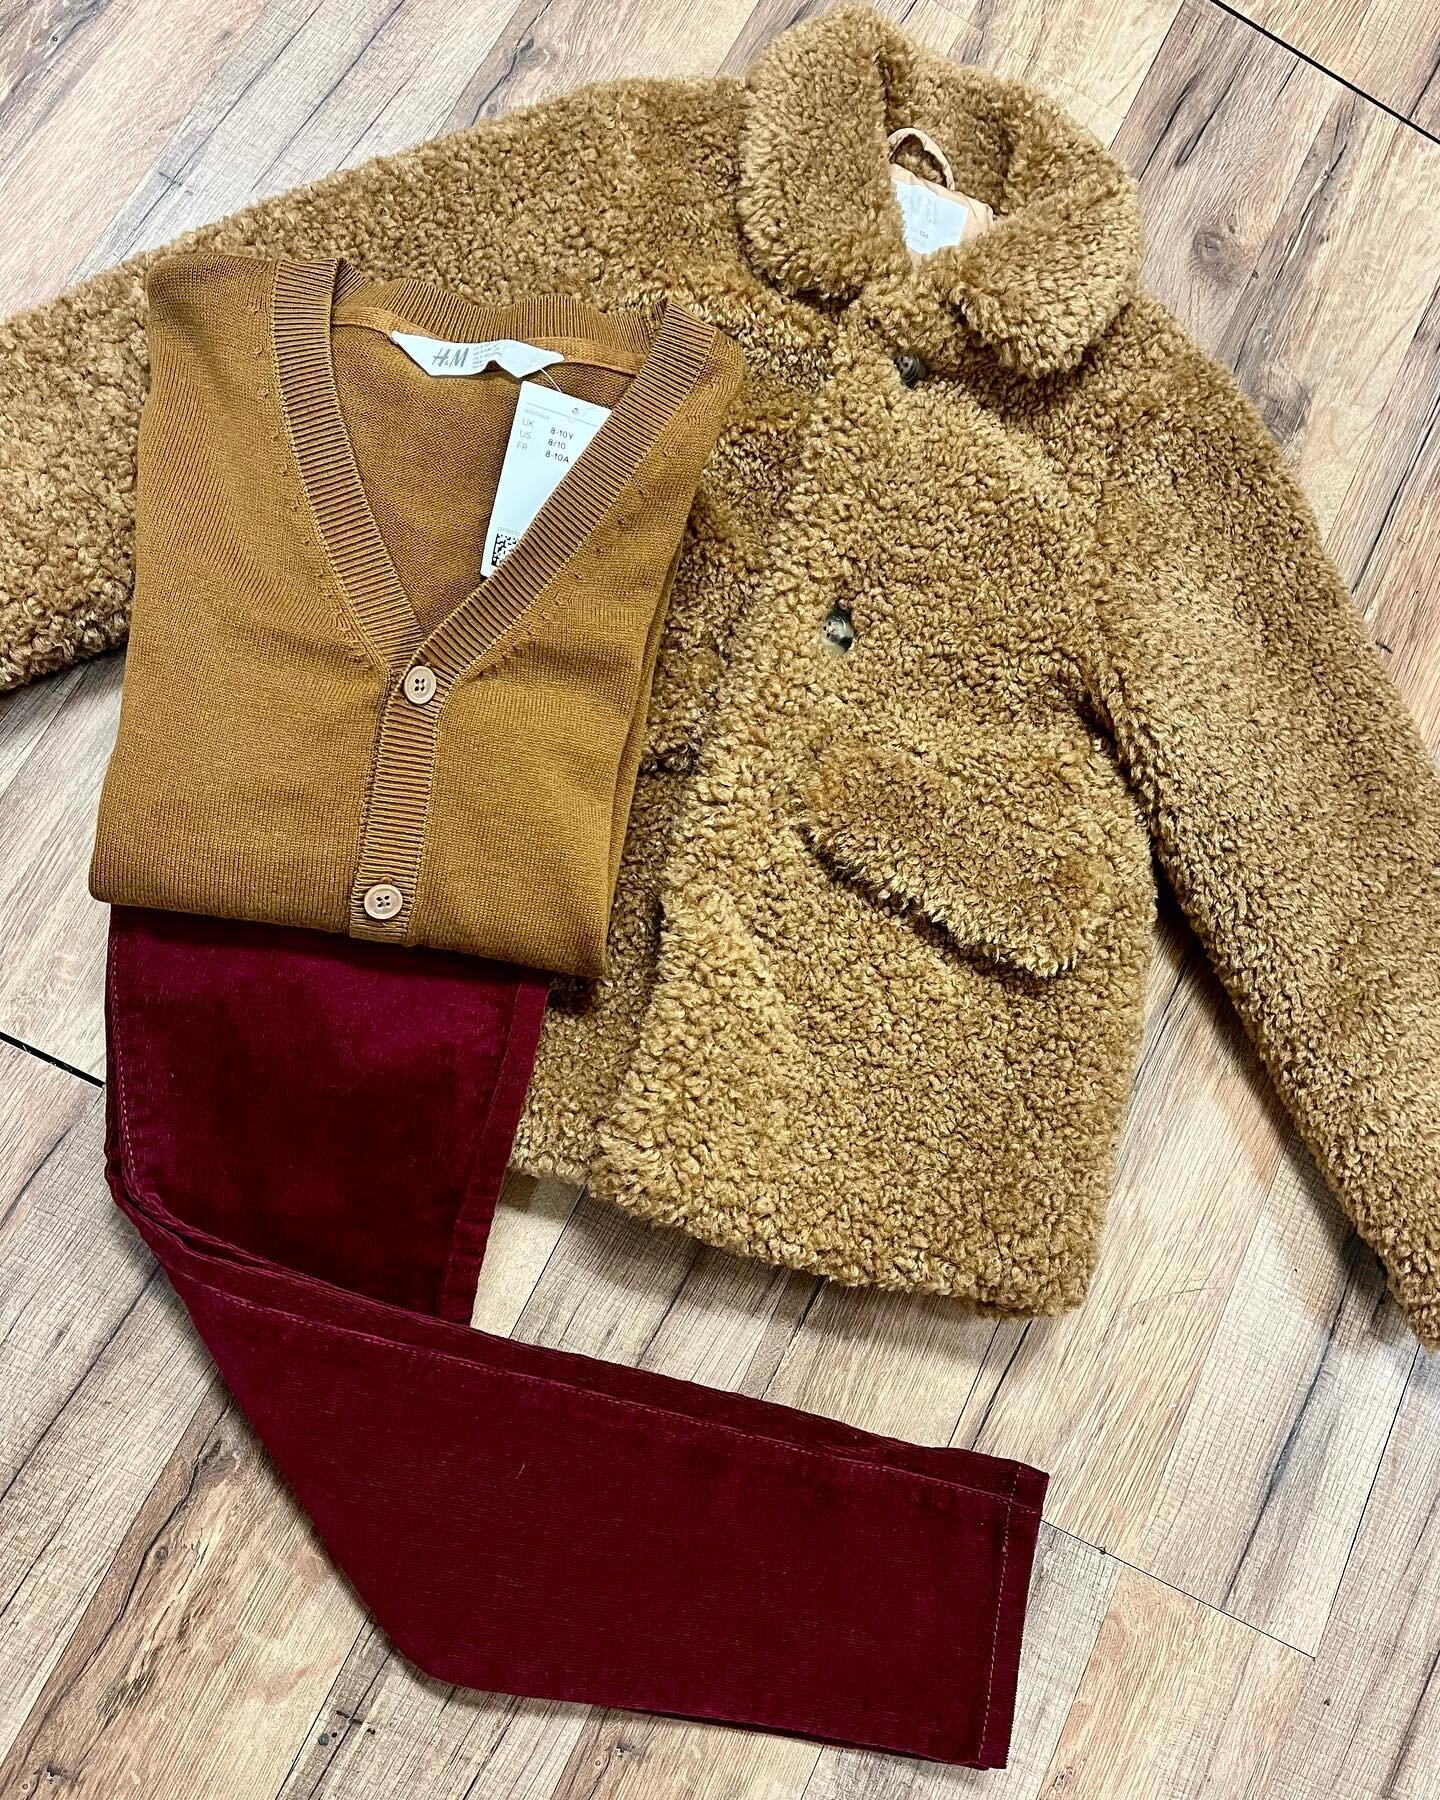 Did you know that we also carry children&rsquo;s clothing?? Here are just a few beautiful pieces 🥰 Courtesy of Zara and H&amp;M!
.
.
#uptownattic #designerconsignment #childrensconsignment #consignment #consignmentboutique #consignmentshop #thriftst